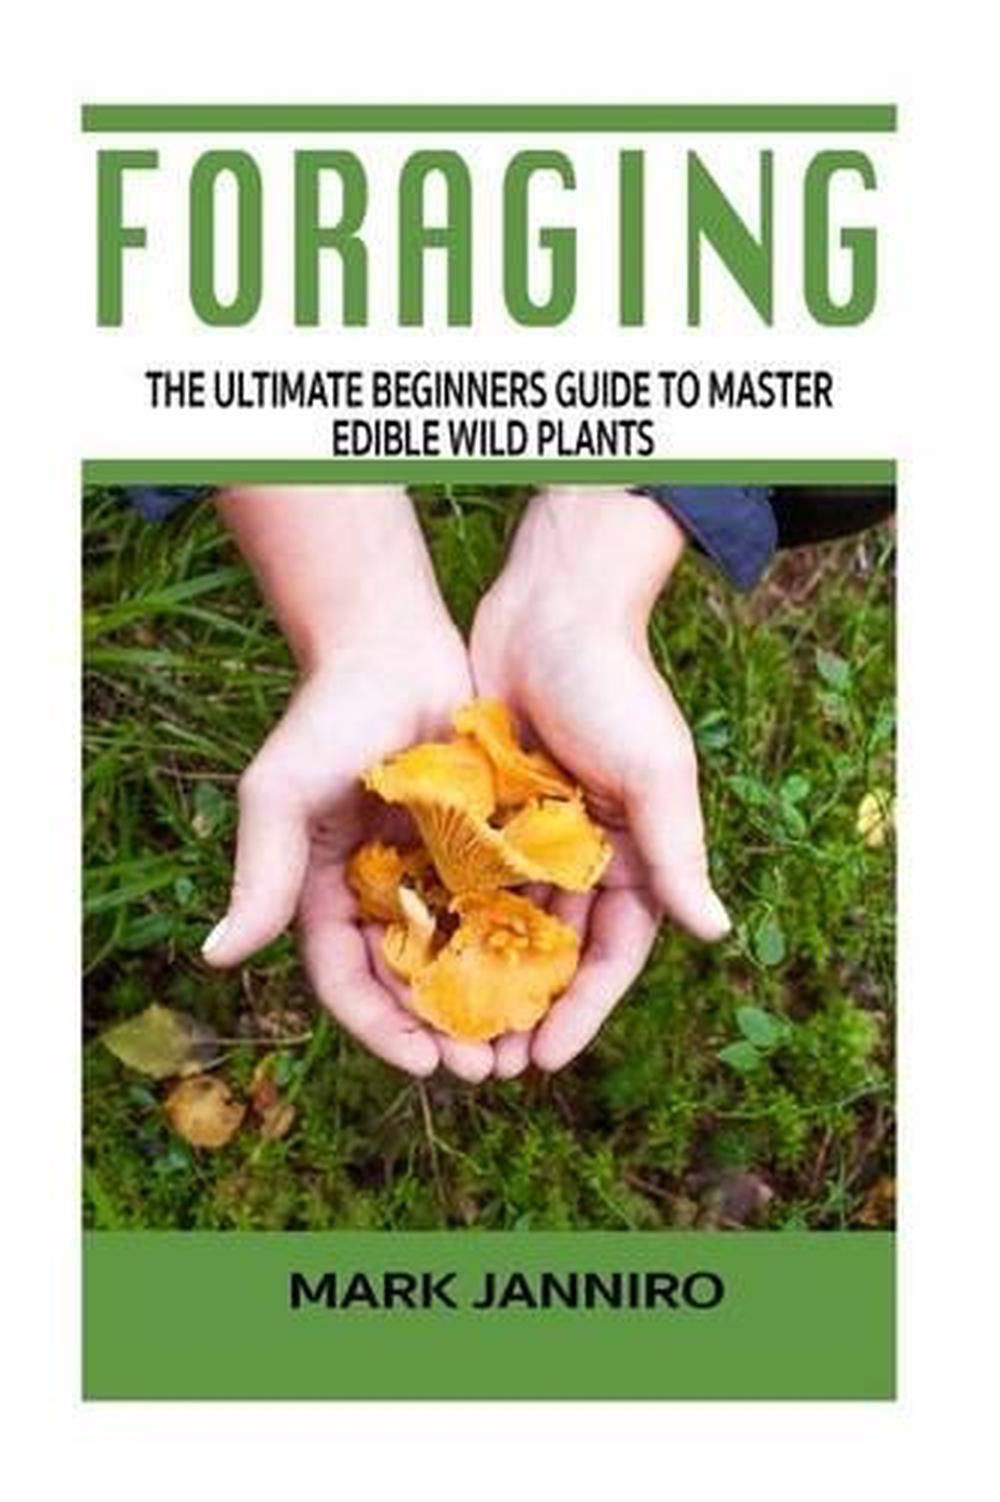 Foraging The Ultimate Beginners Guide To Master Edible Wild Plants